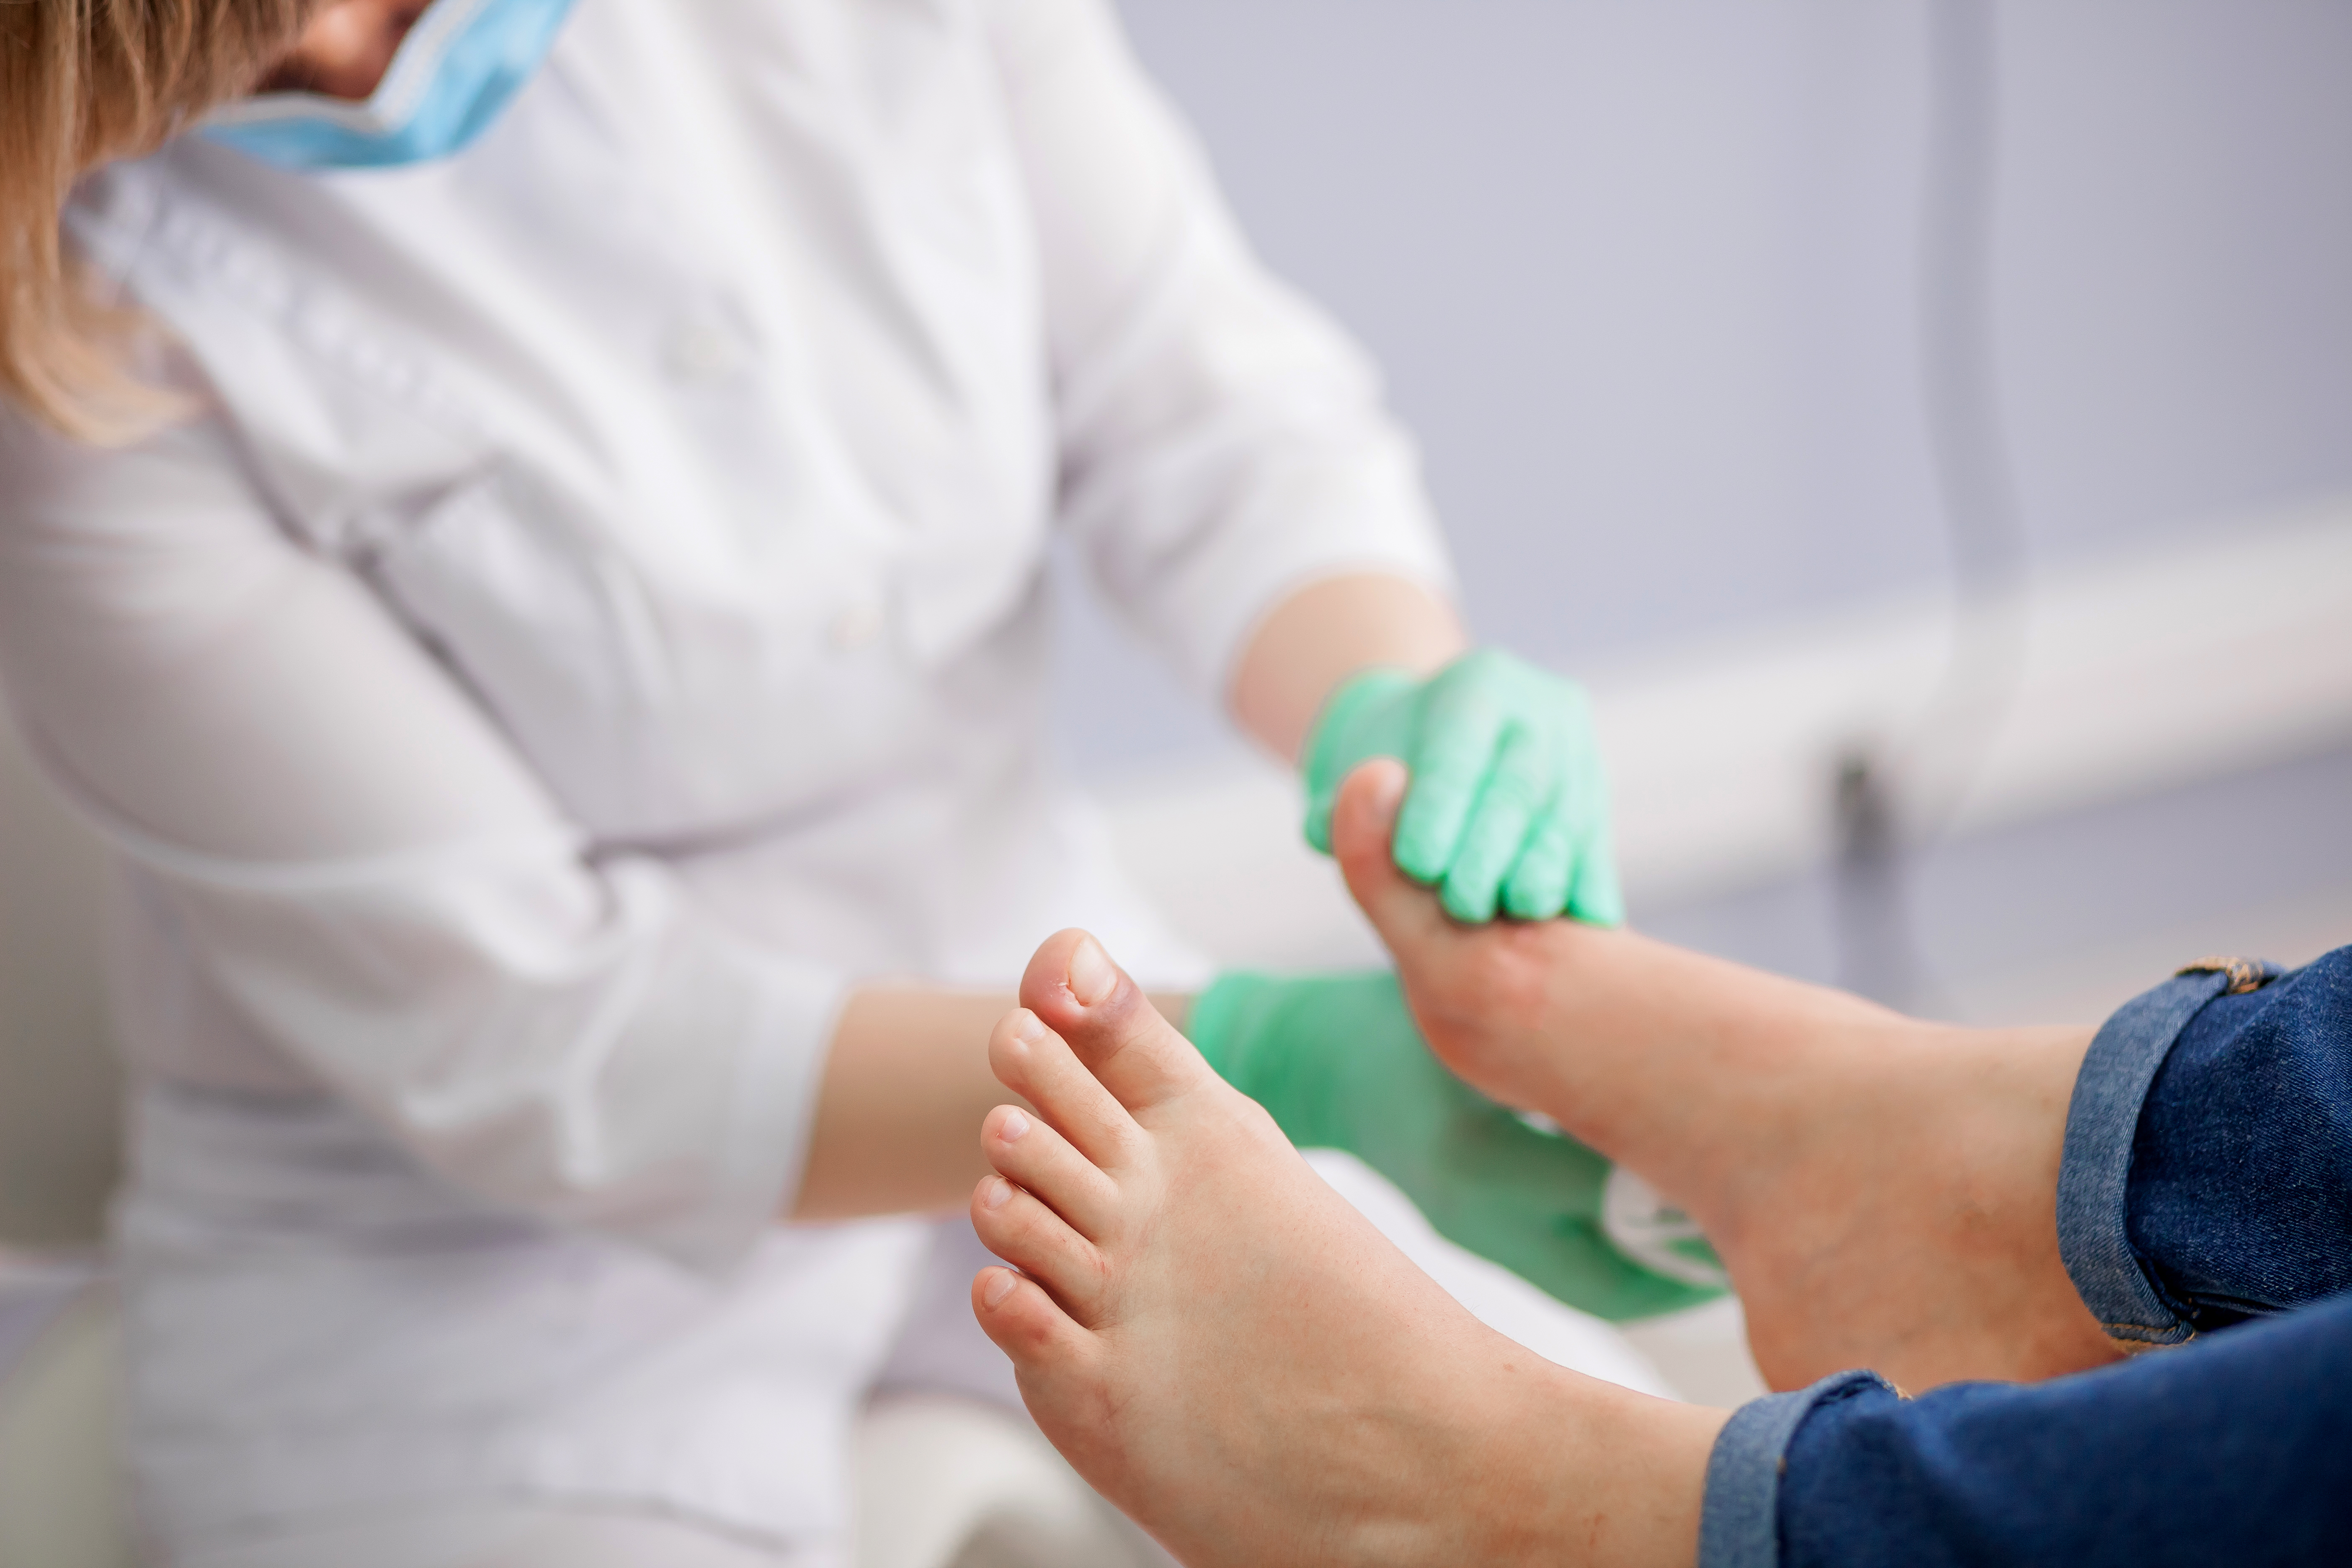 A health care provider examines a patient's feet